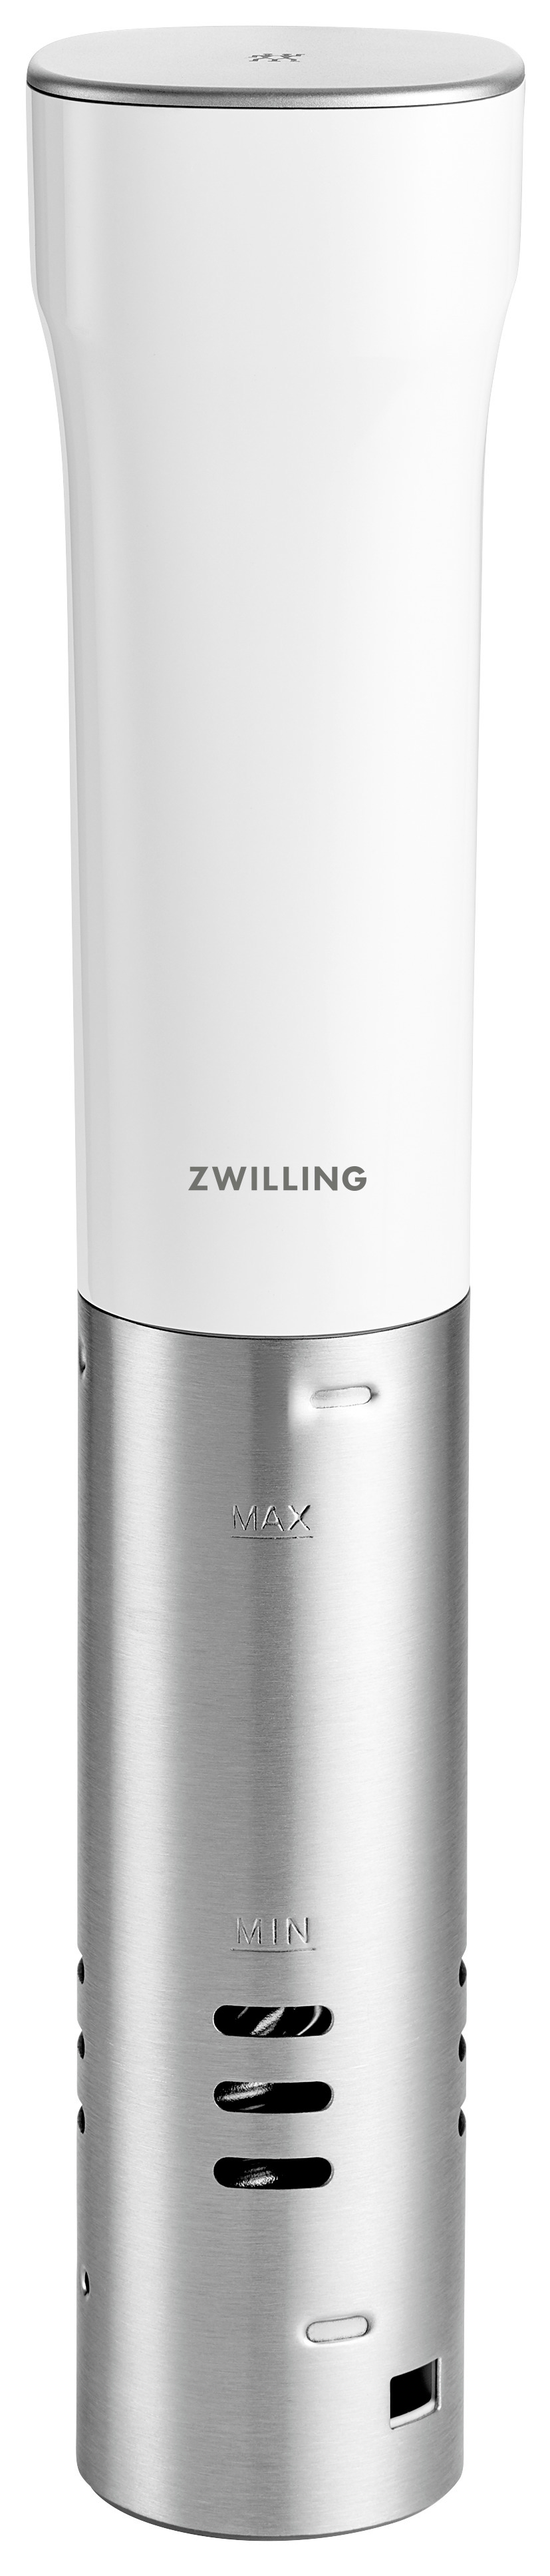 THERMOPLONGEUR - ZWILLING® ENFINIGY